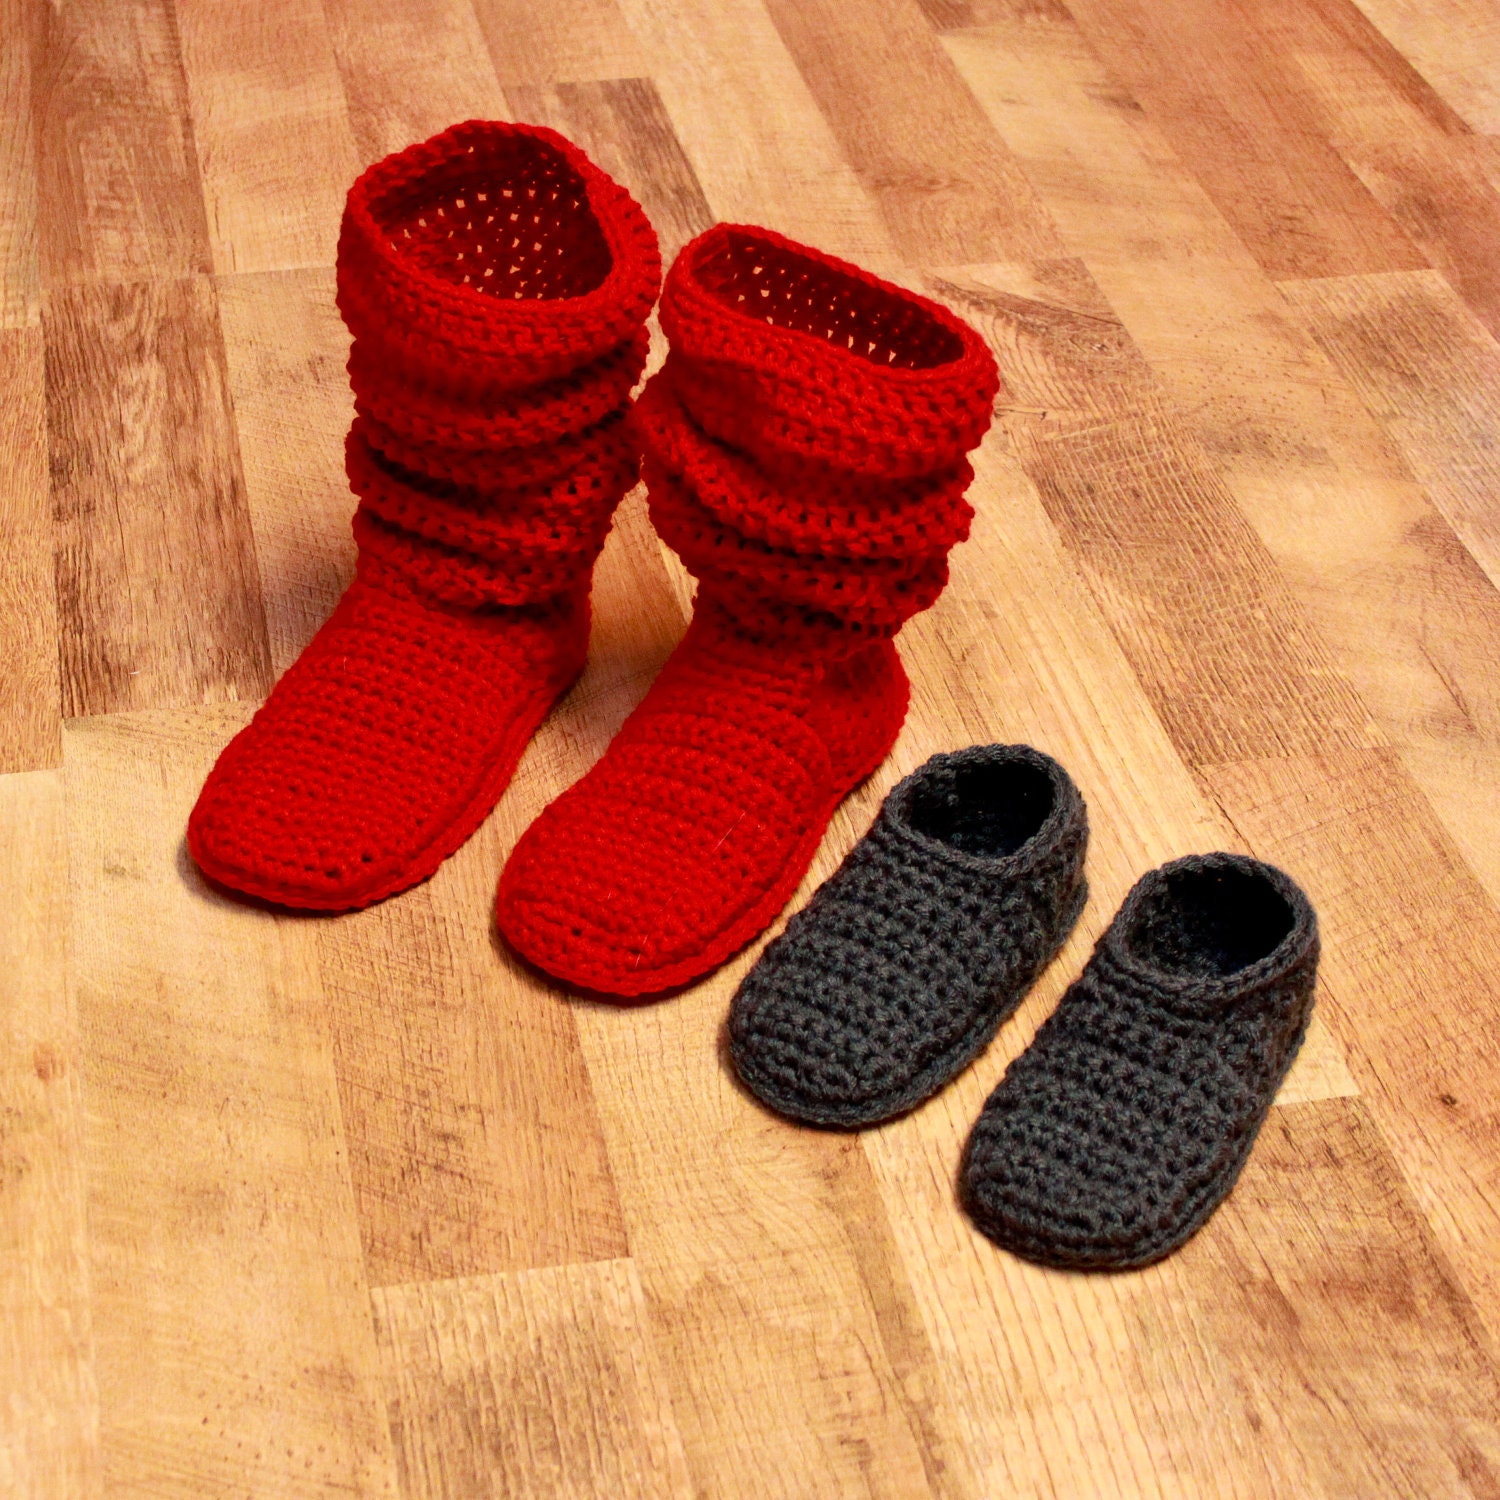 CROCHET PATTERN: Mamachee Boots (Adult Women Sizes) Cable instructions included.